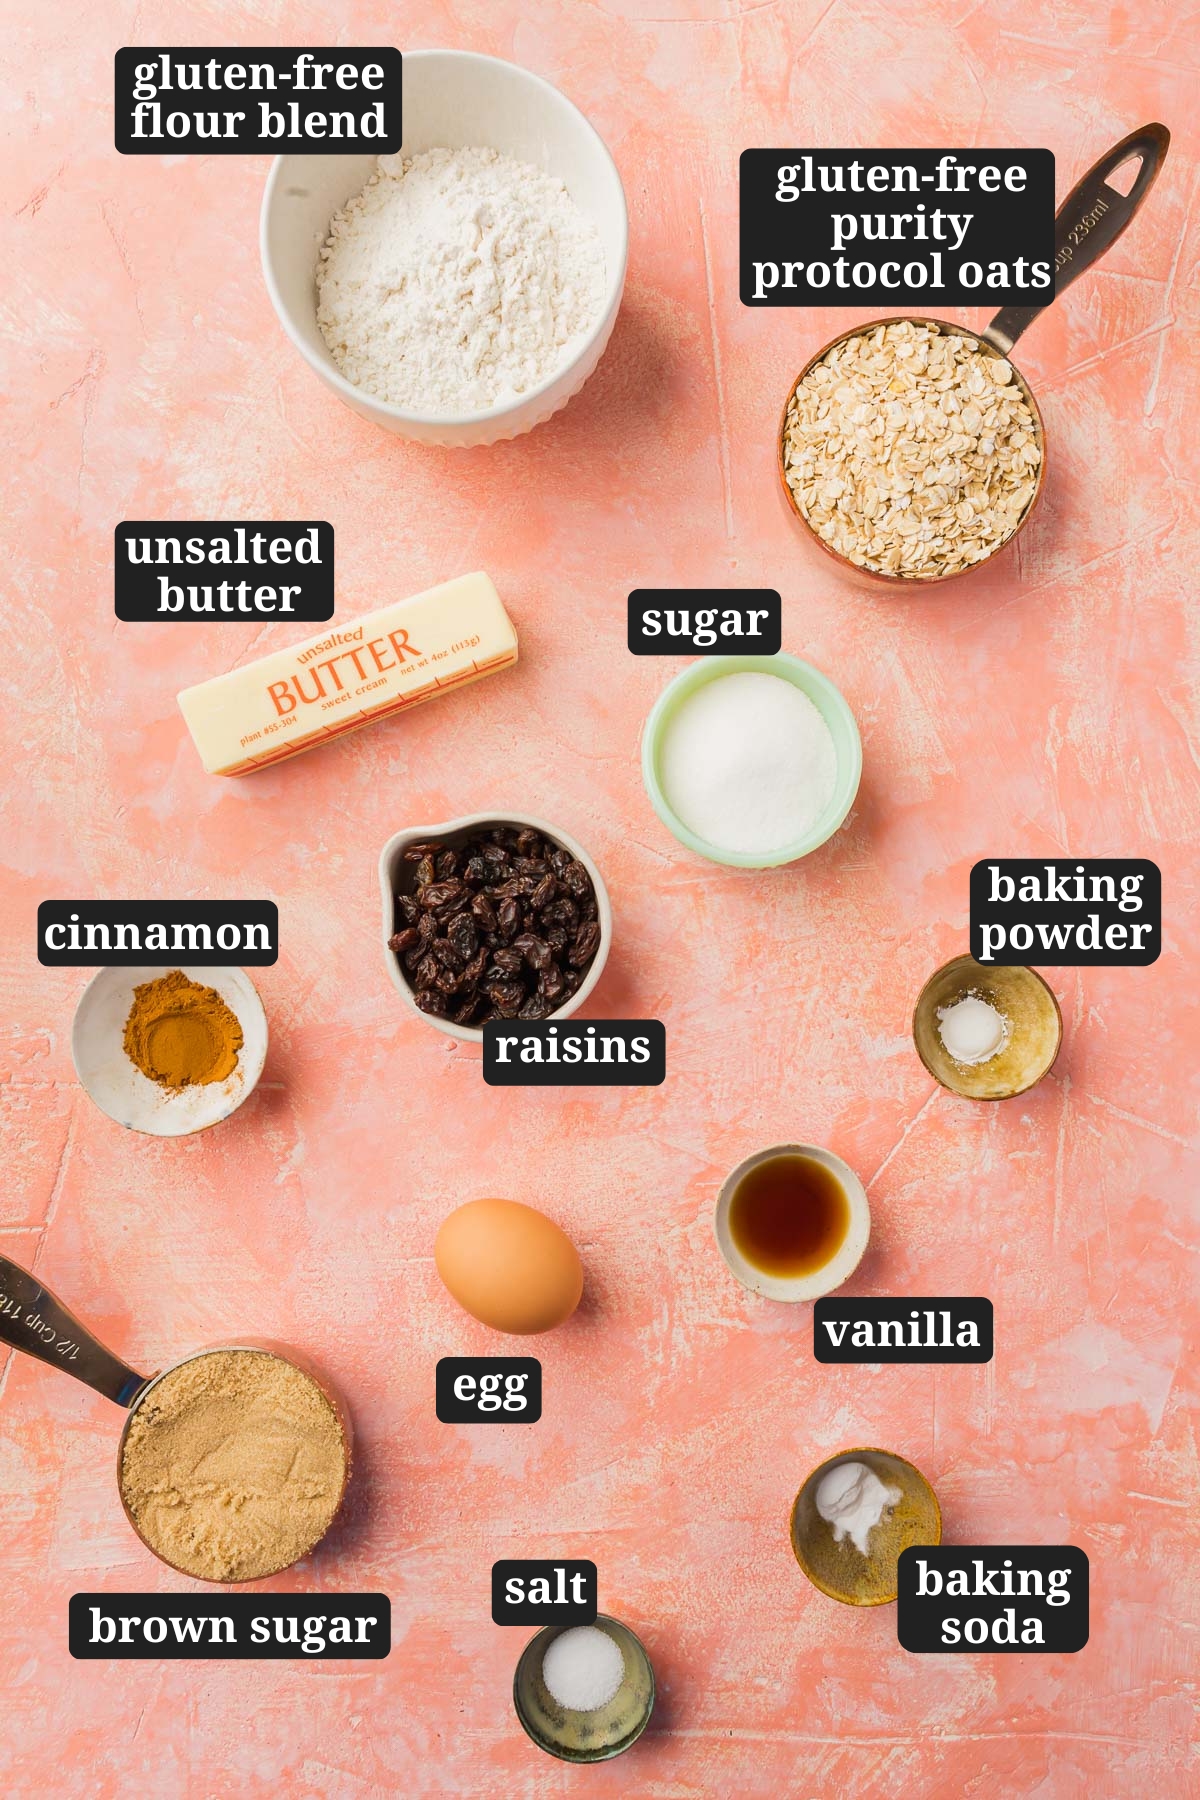 An overhead view of ingredients in small bowls to make gluten free oatmeal raisin cookies, including gluten-free flour blend, purity protocol oats, unsalted butter, sugar, cinnamon, raisins, baking powder, egg, vanilla, brown sugar, salt and baking soda with text overlays over each ingredient.